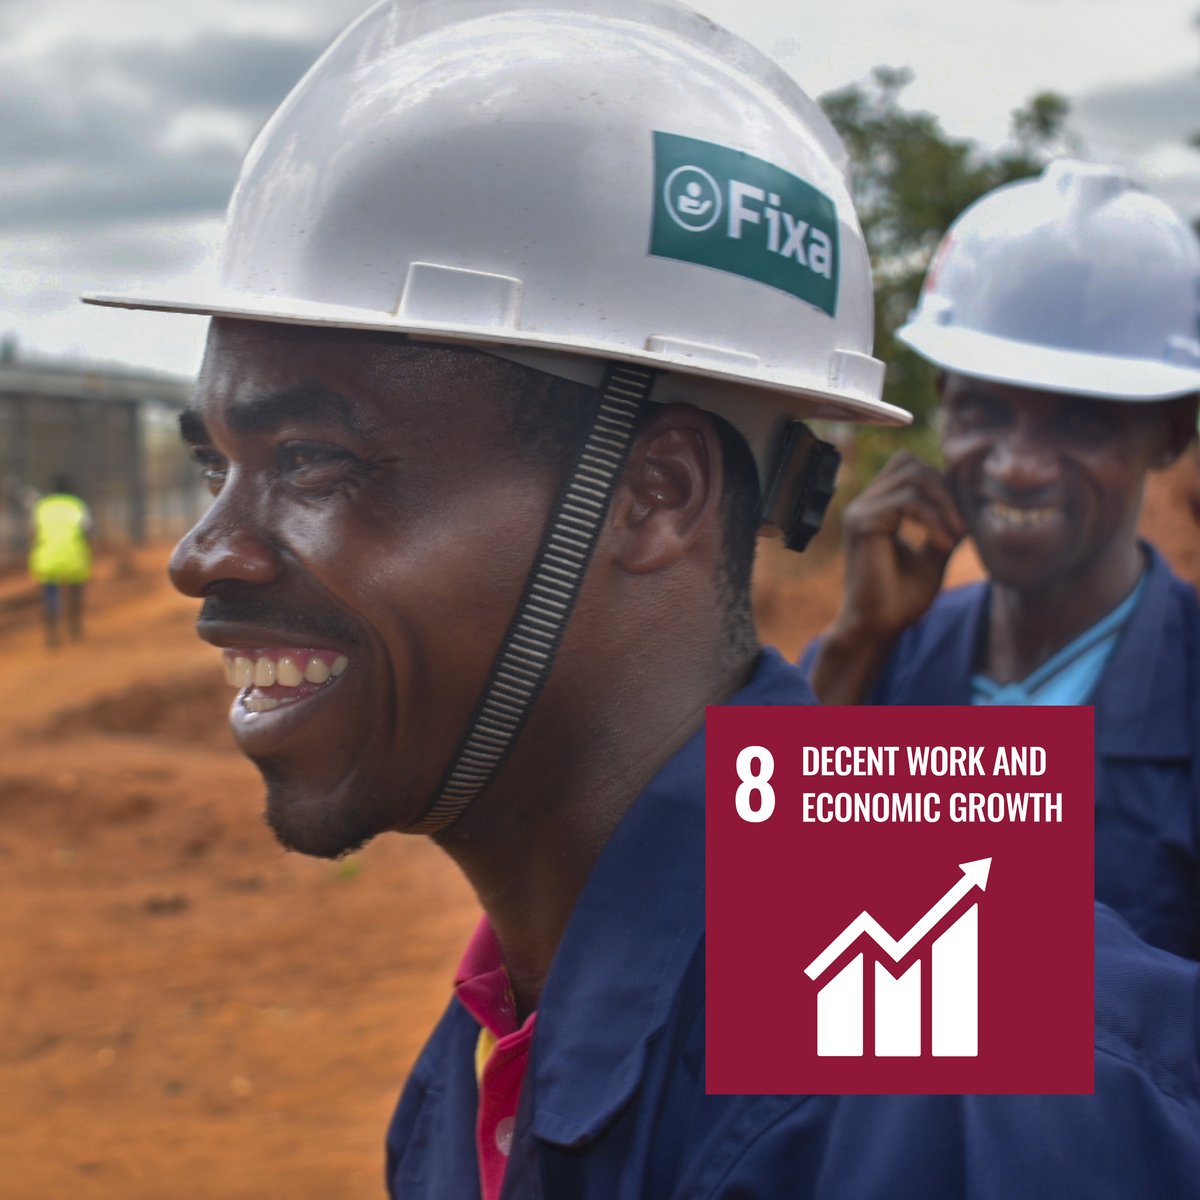 This initiative supports SDG 8, aiming for decent work for all.